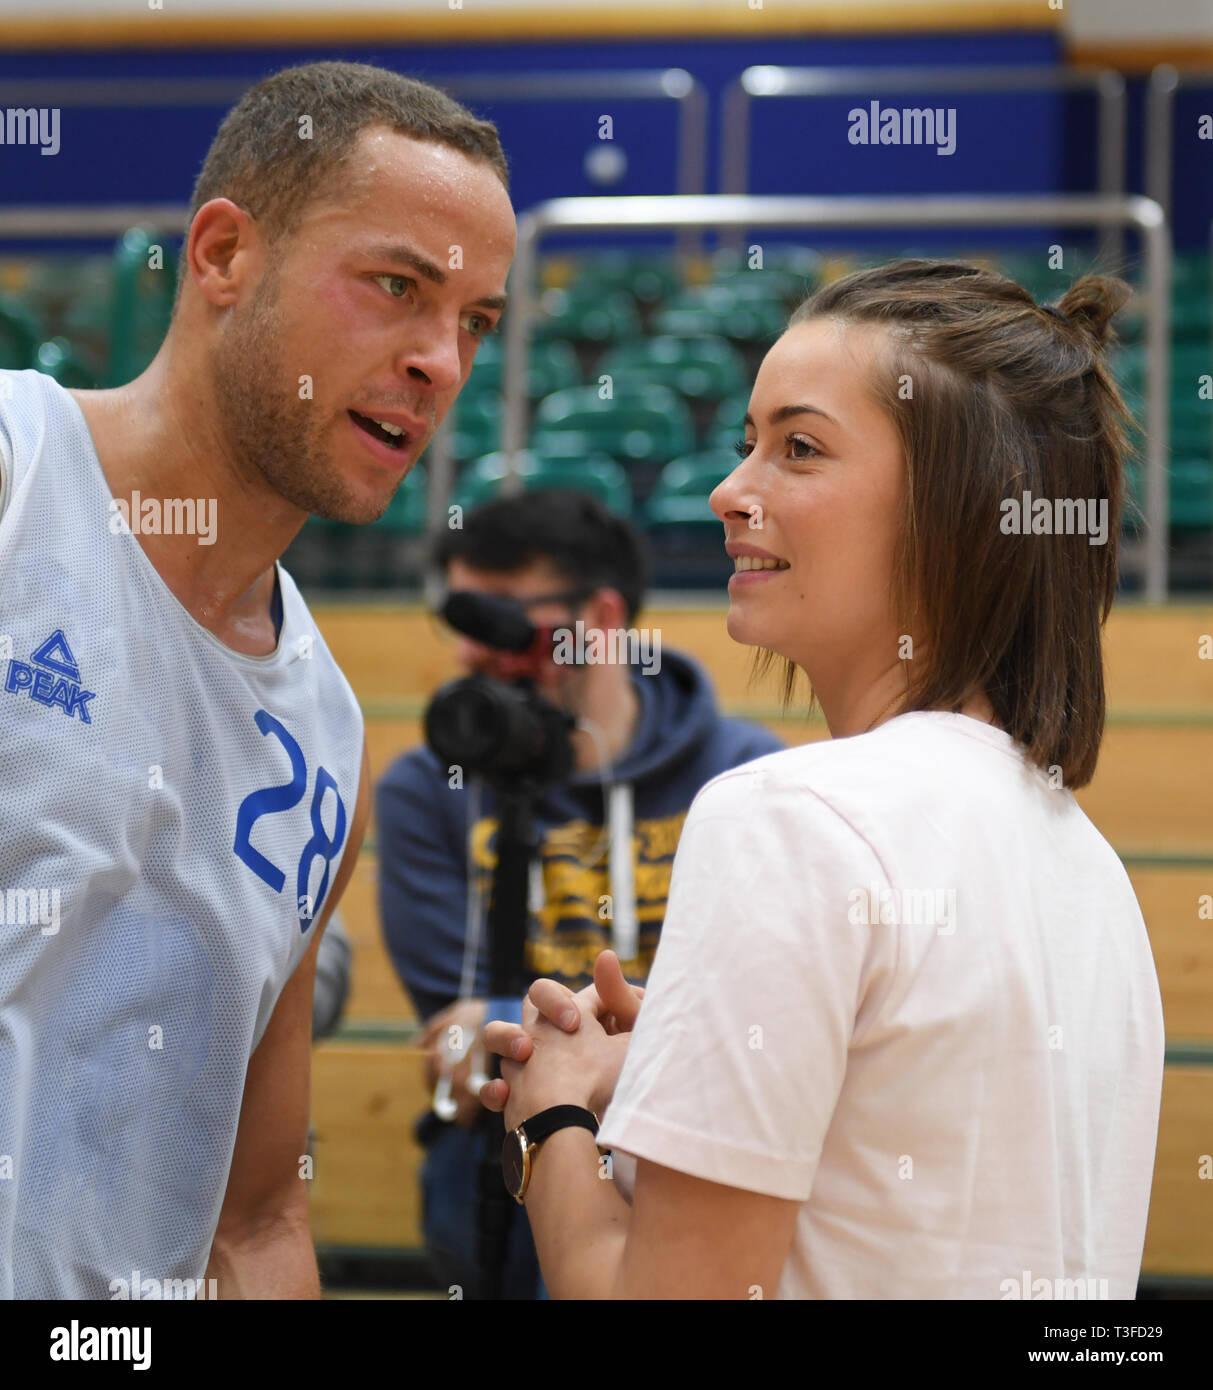 09 April 2019, Hessen, Frankfurt/Main: Andrej Mangold, "TV-Bachelor", and  his girlfriend Jennifer Lange stand together after the training of the basketball  team Fraport Skyliners. Mangold continues his professional career in  Frankfurt. Photo: